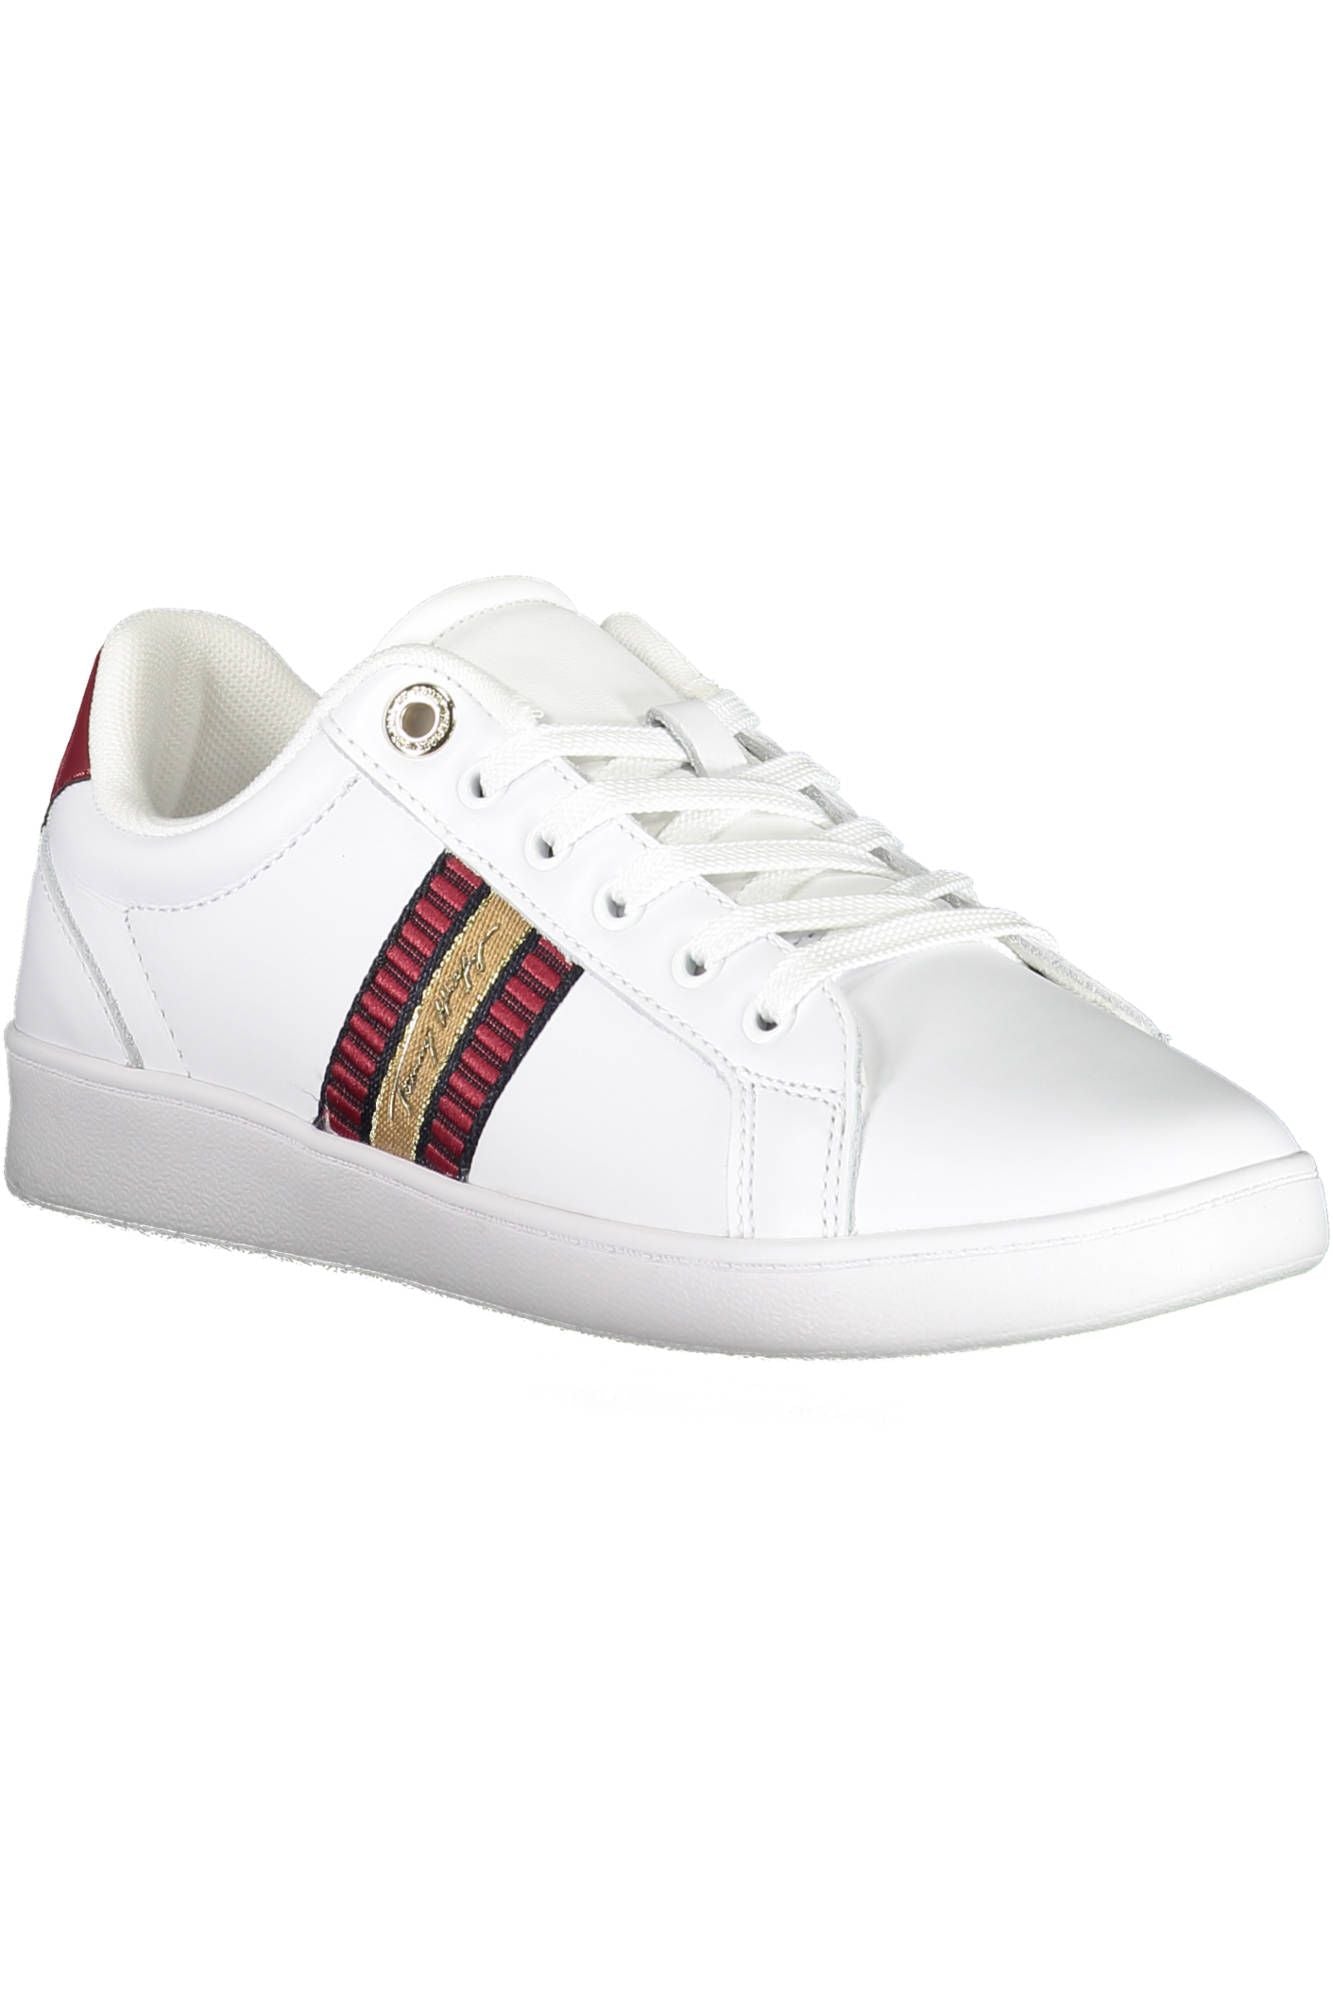 Tommy Hilfiger Eco Chic White Lace-Up Sneakers